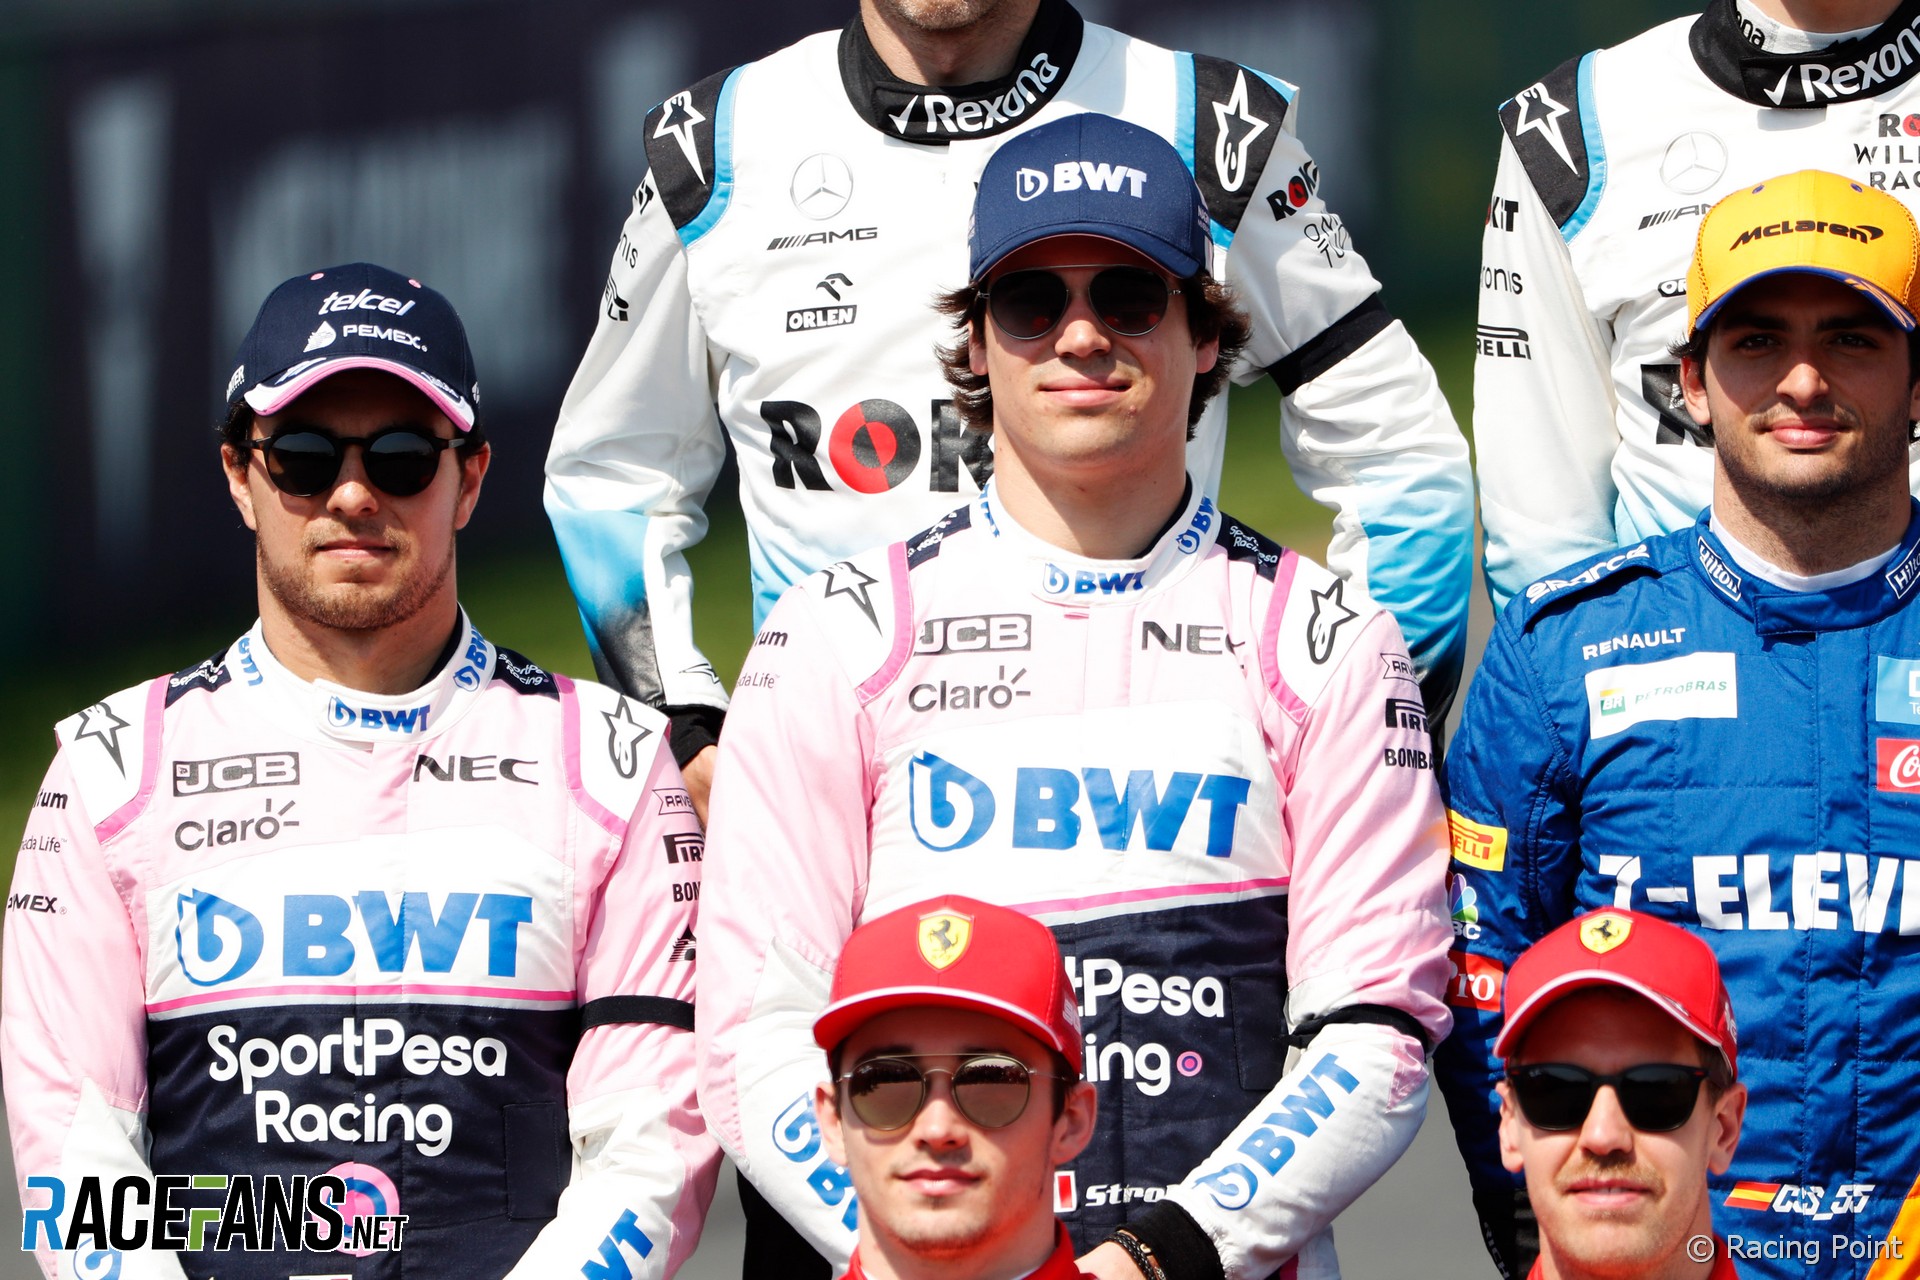 Sergio Perez and Lance Stroll in the F1 drivers' photograph, Albert Park, 2019